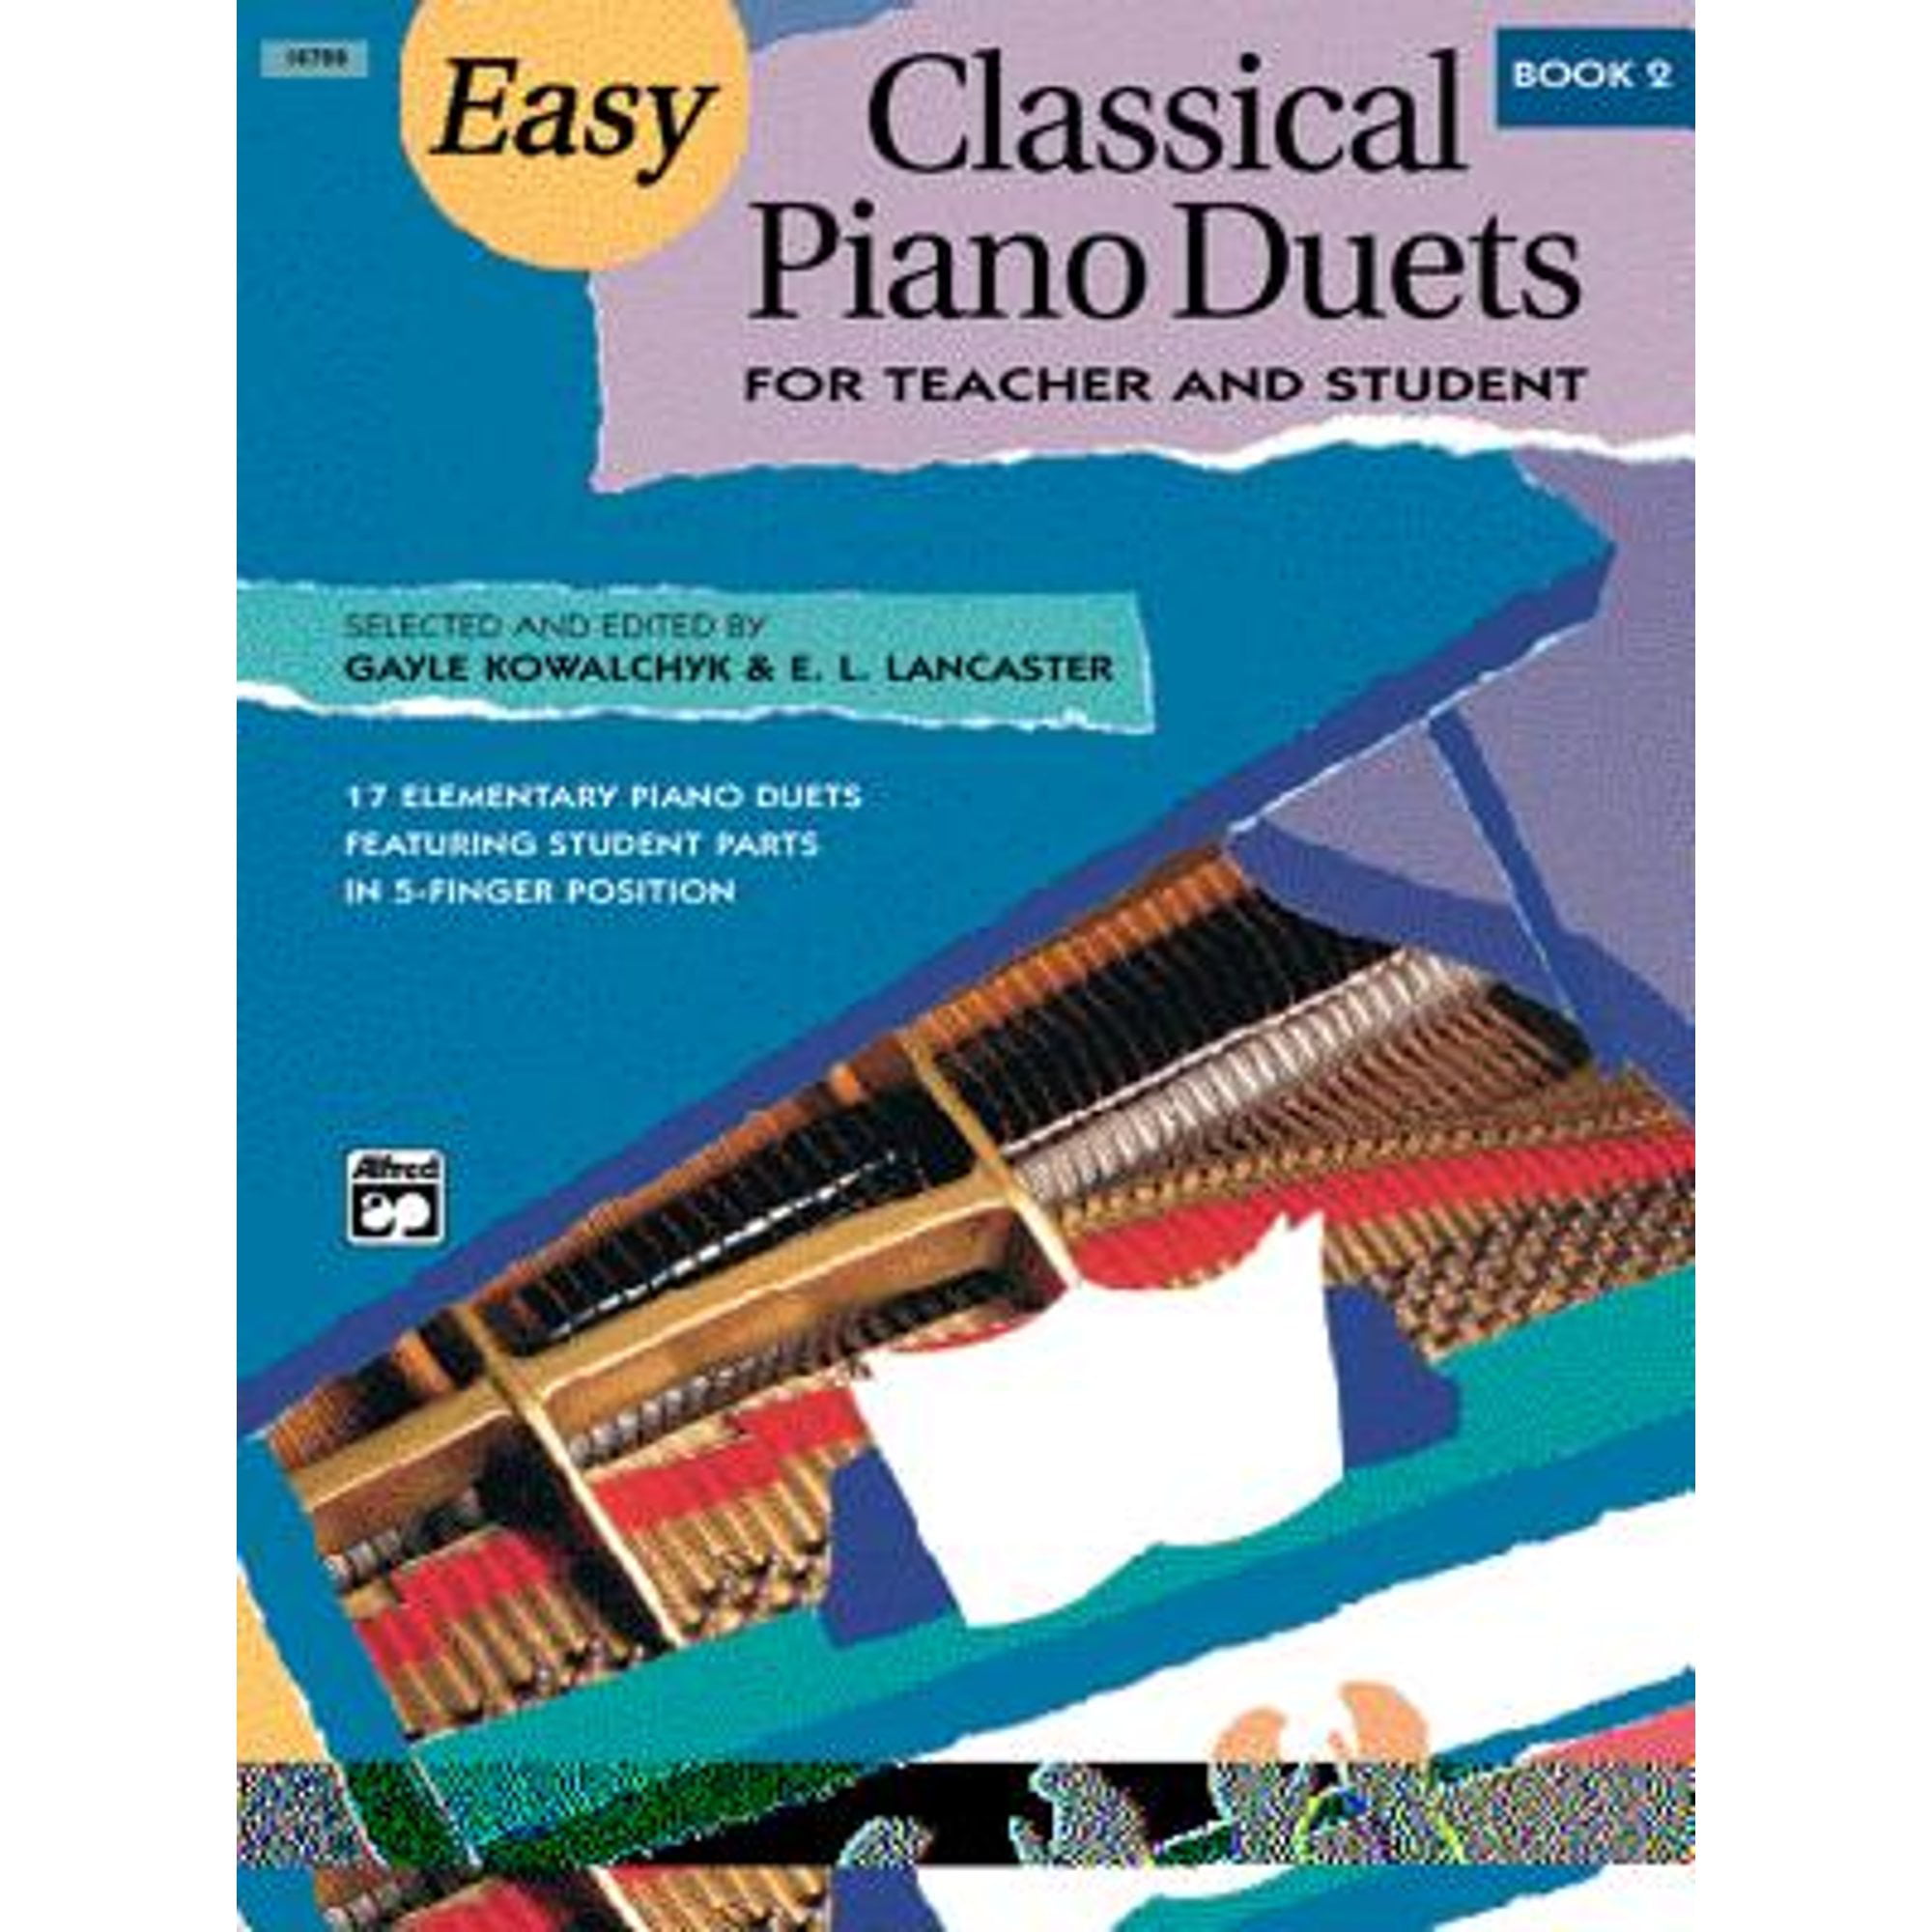 Pre-Owned Easy Classical Piano Duets for Teacher and Student, Bk 2 (Paperback 9780882849157) by Gayle Kowalchyk, E L Lancaster